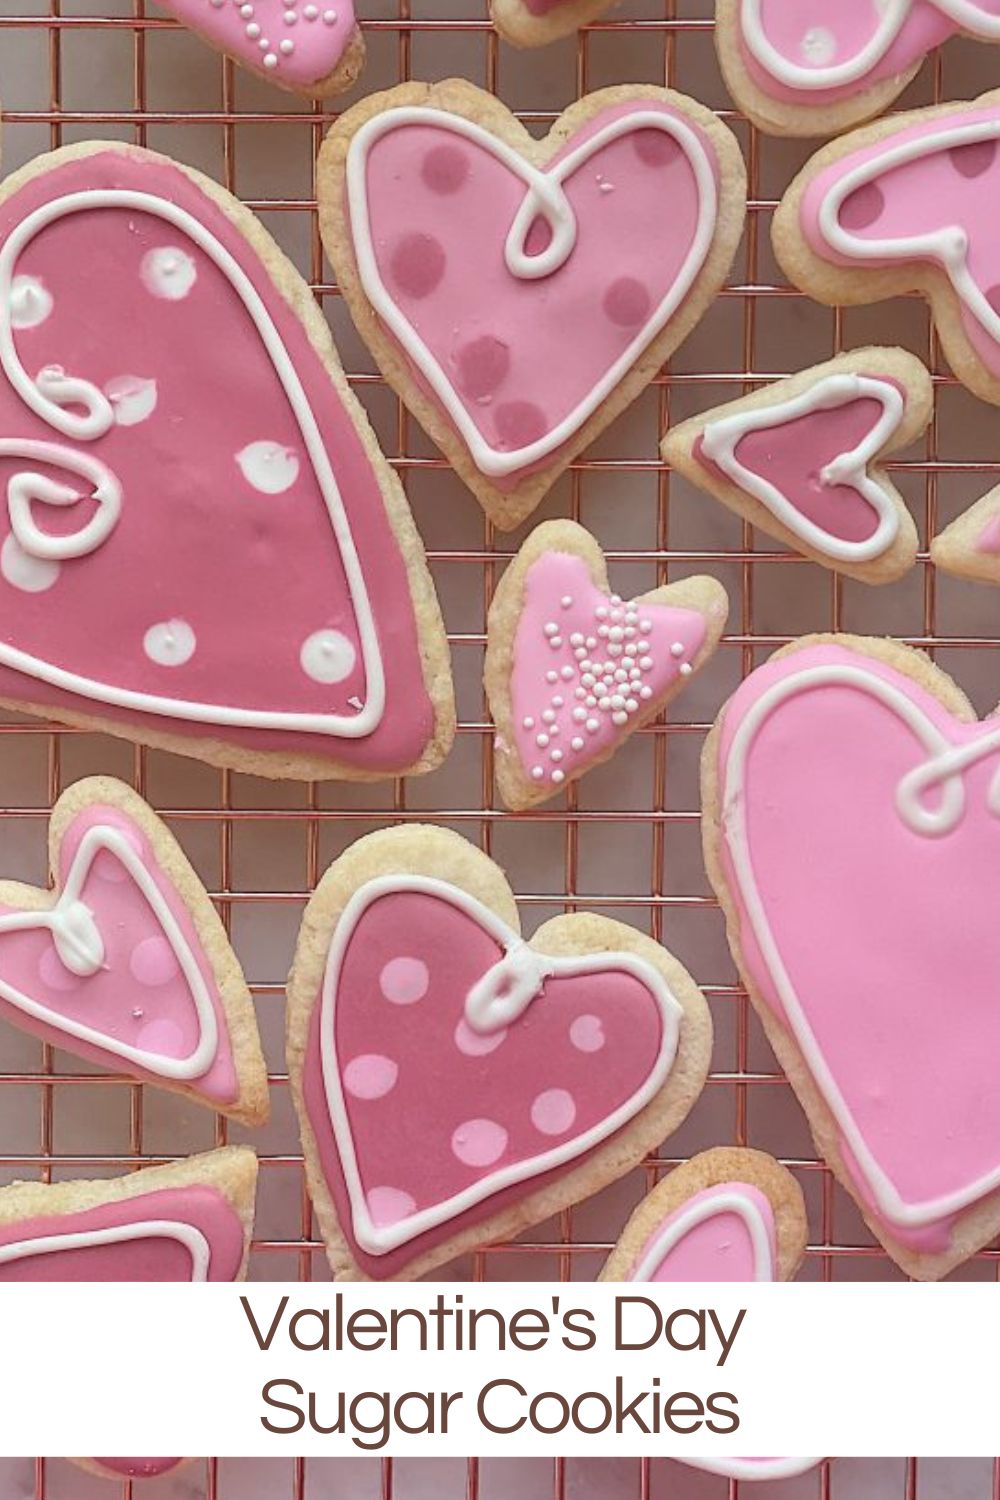 These Valentine's Day sugar cookies are so much fun to make. If you are not a master baker, no worries. You can make these!